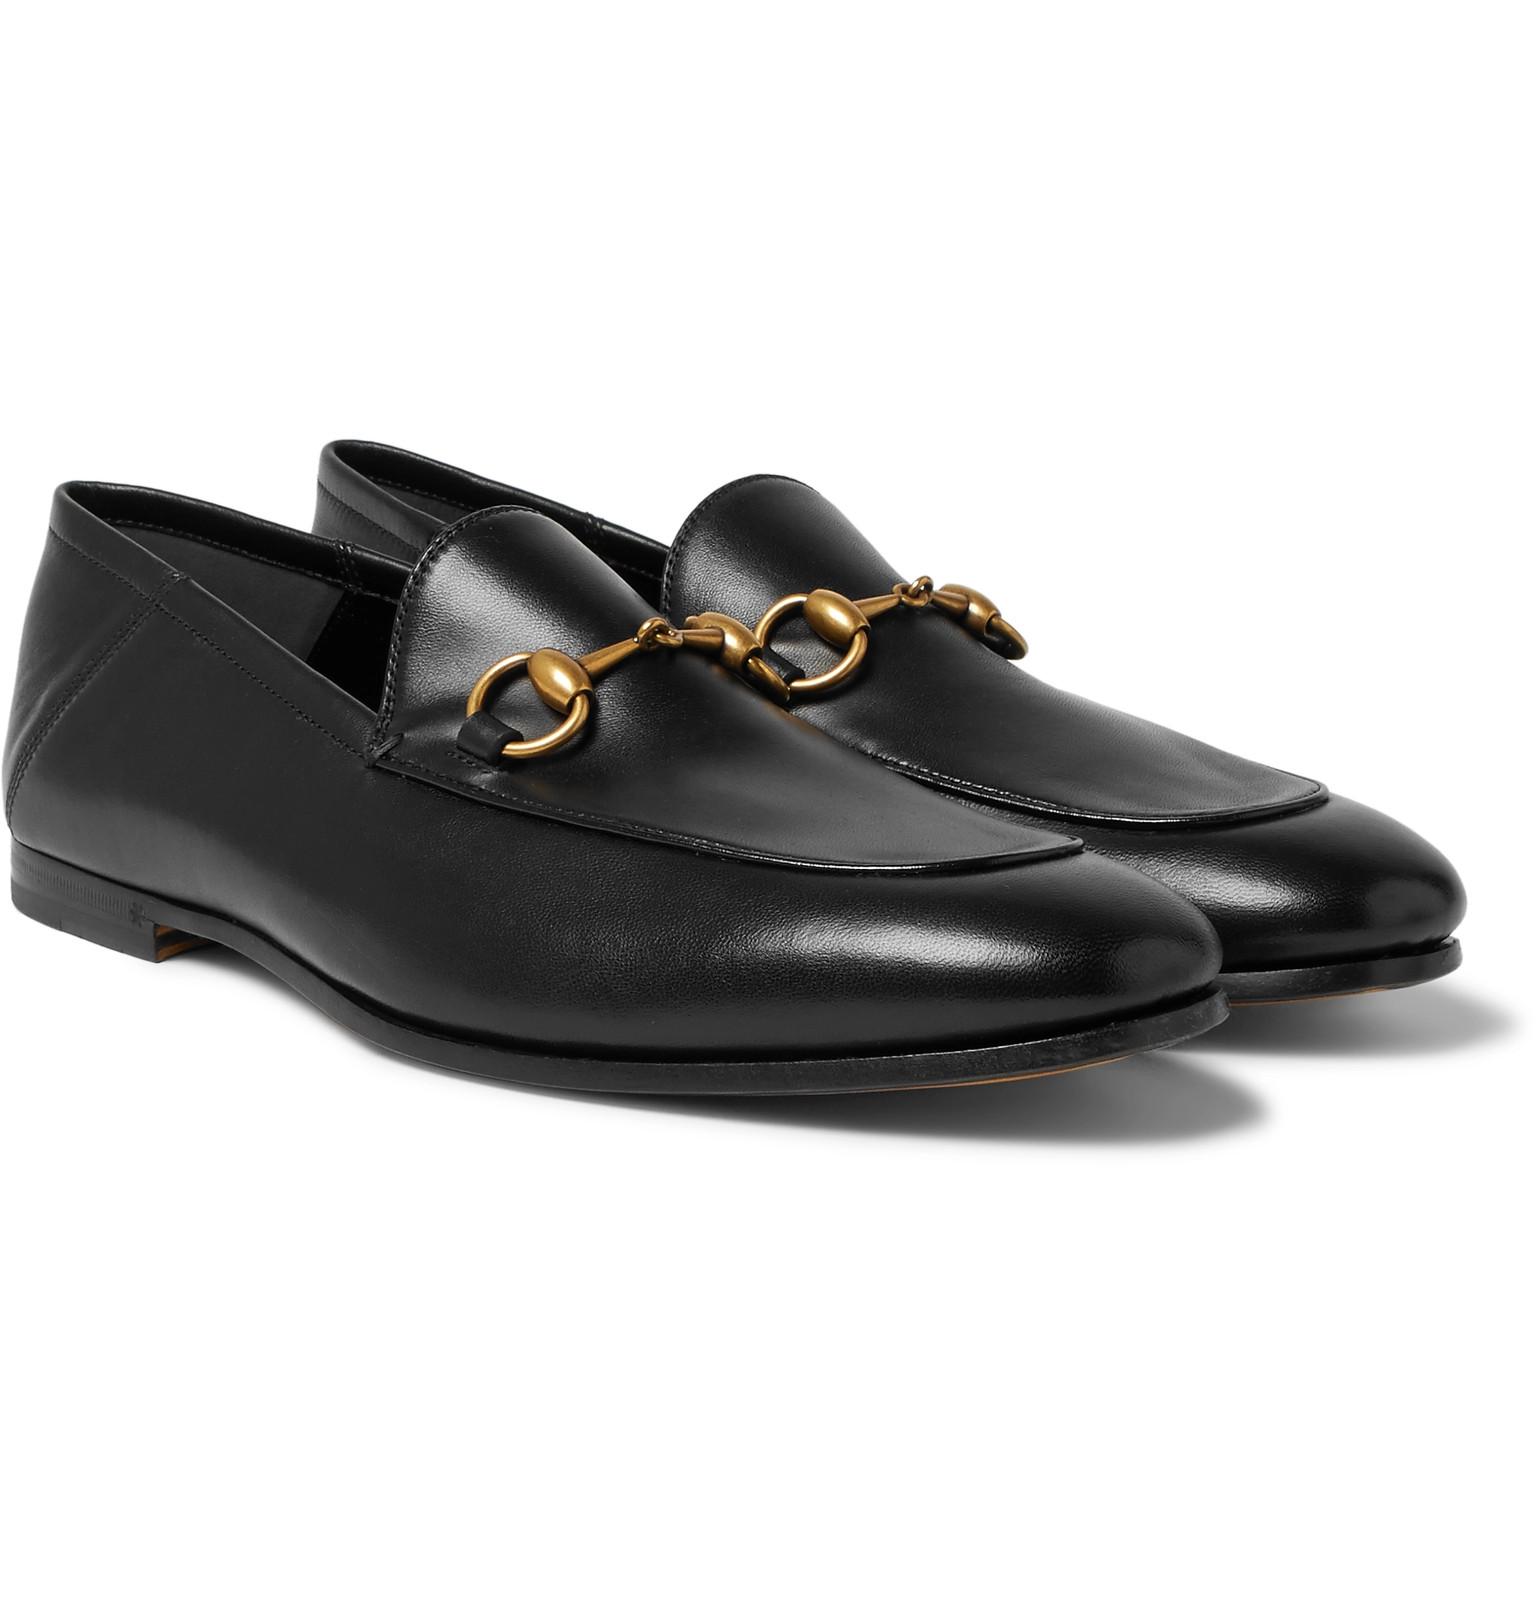 Gucci Black Horsebit Leather Loafers for Men - Lyst